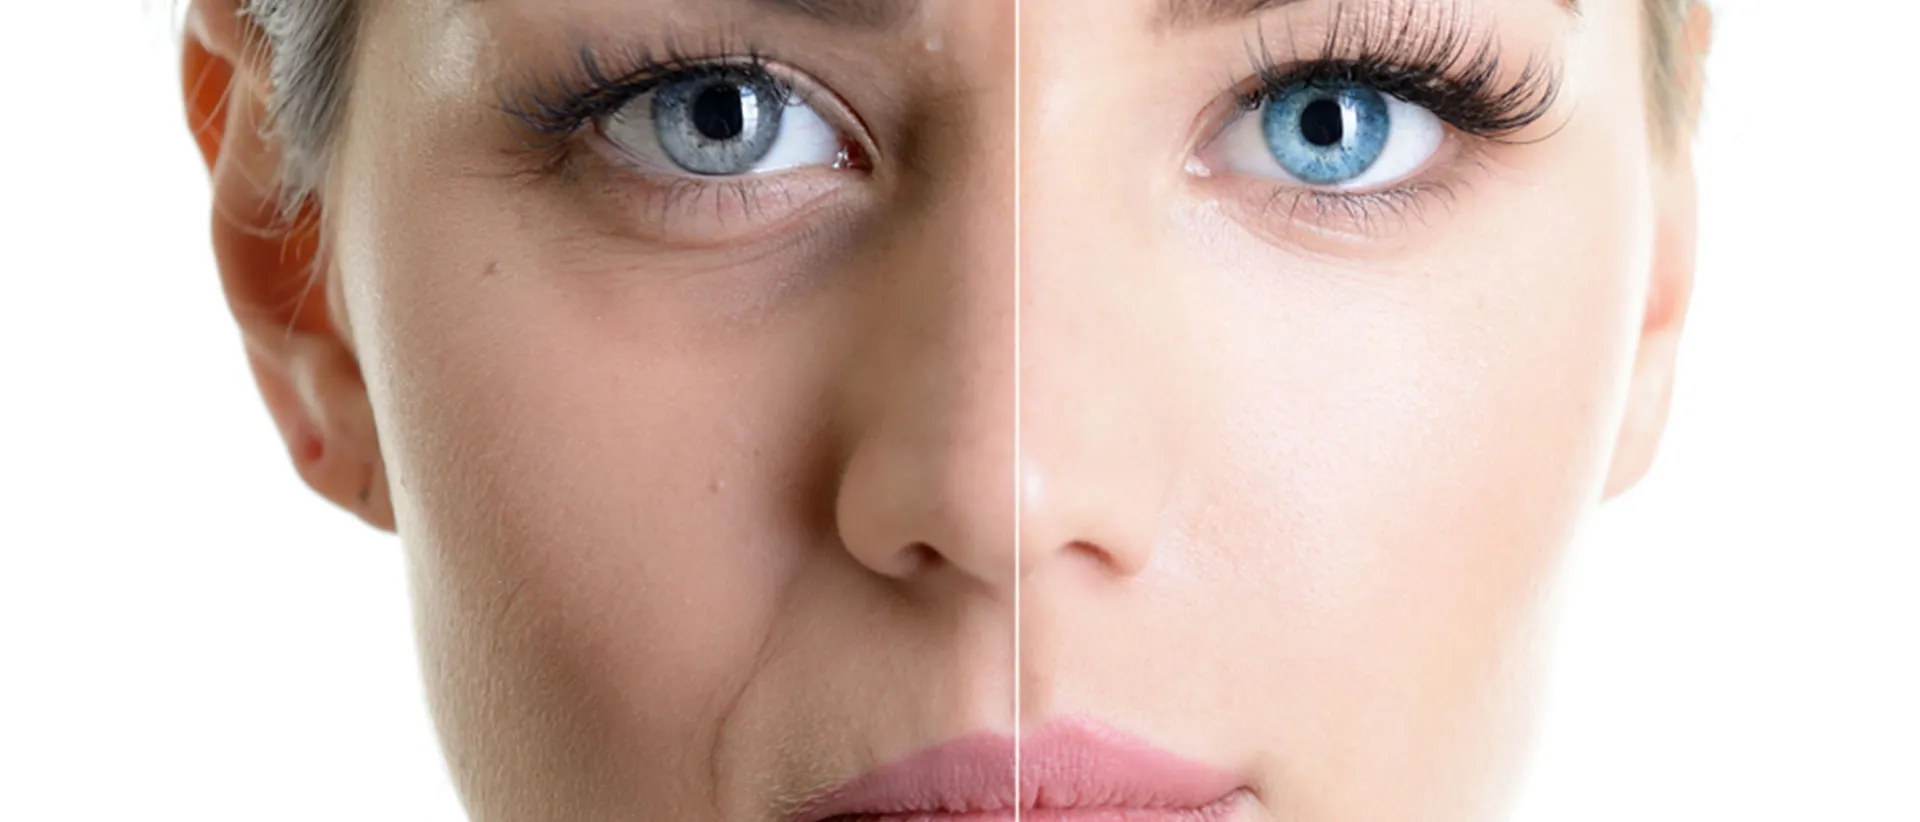 Anti aging treatment in Hyderabad - Close up of woman's face divided by an imaginary line with one half looking younger than the other.
